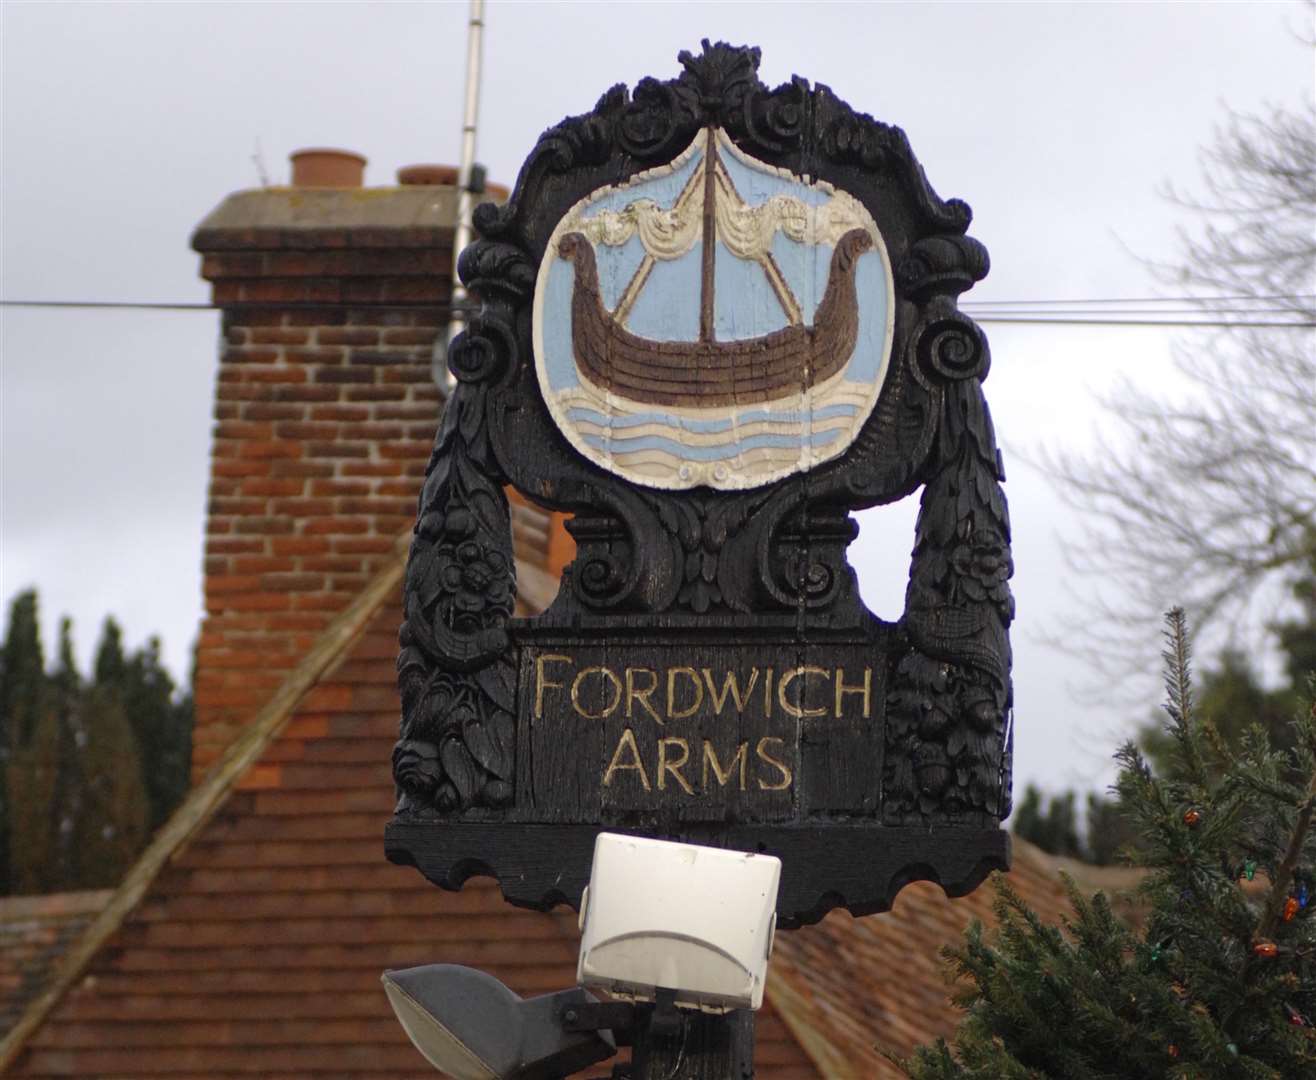 The Fordwich Arms pub has had a Michelin star since 2018